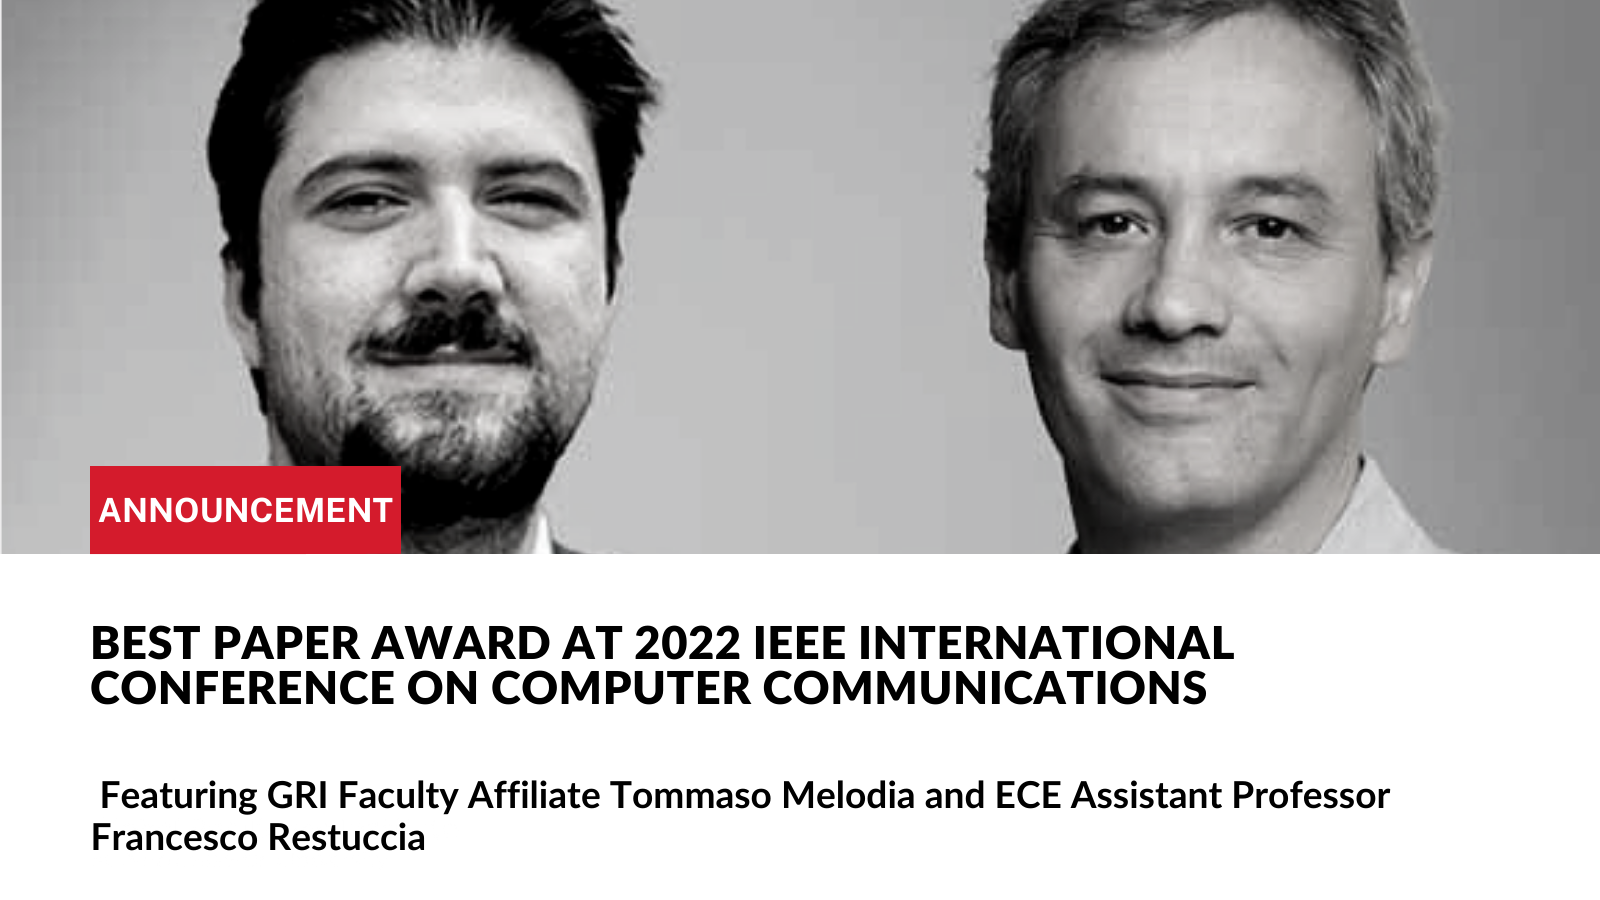 Best Paper Award at 2022 IEEE International Conference on Computer Communications